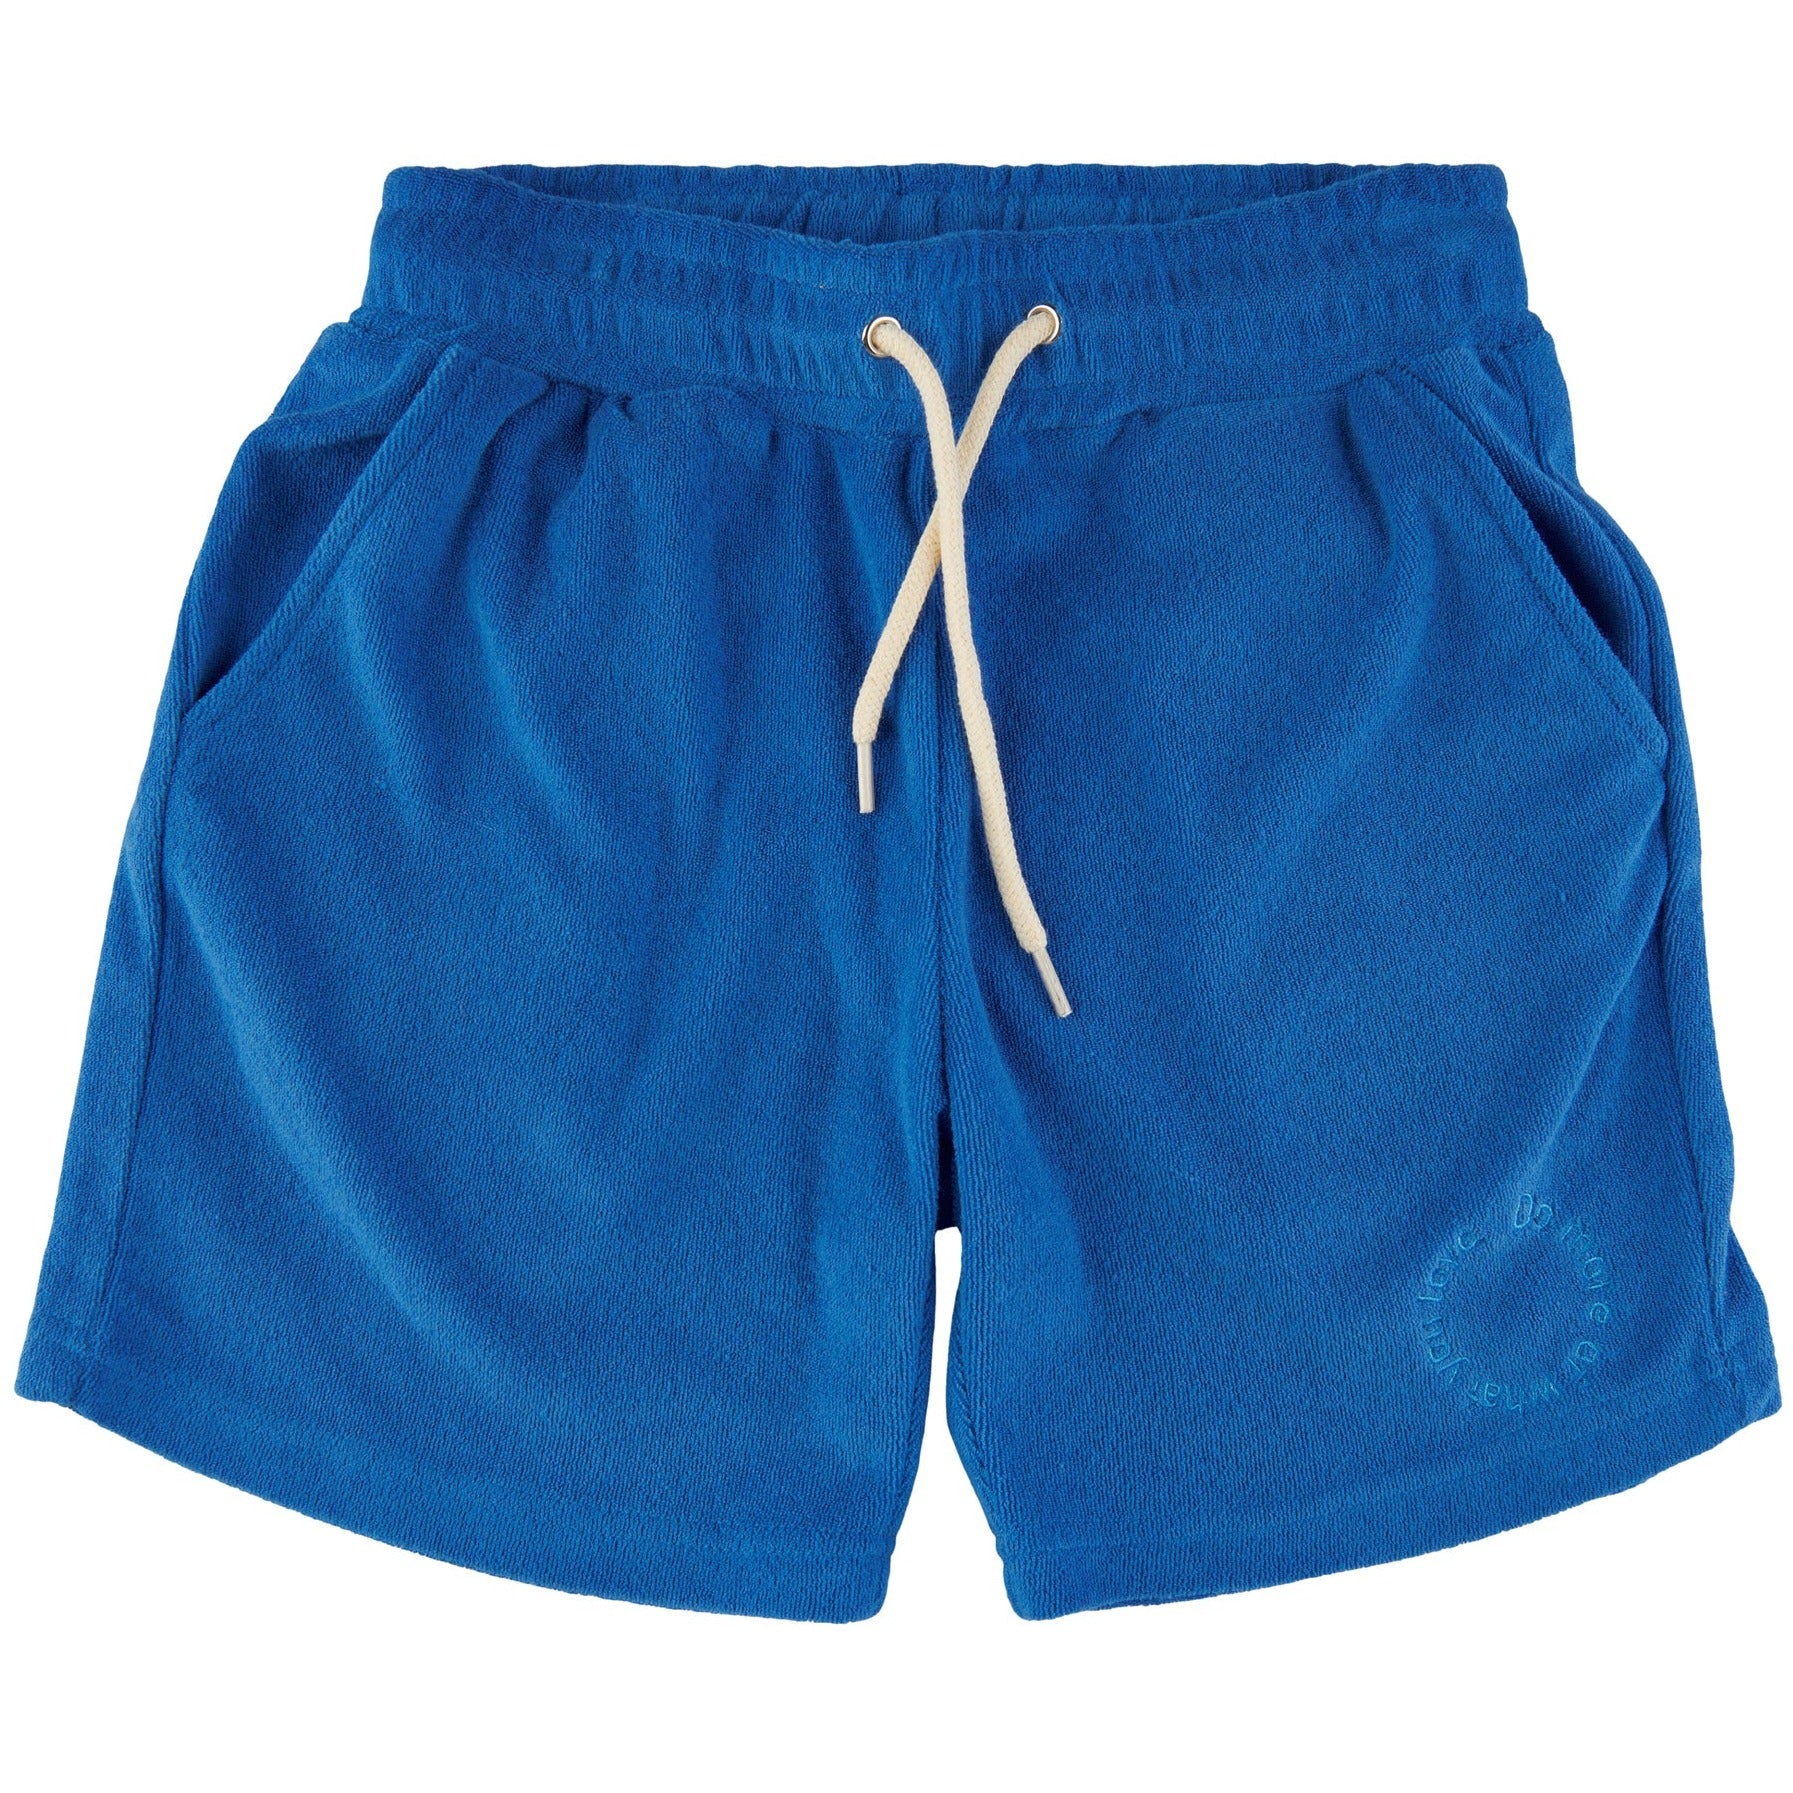 THE NEW - Gimle Terry Shorts (TN4985) - Daphne